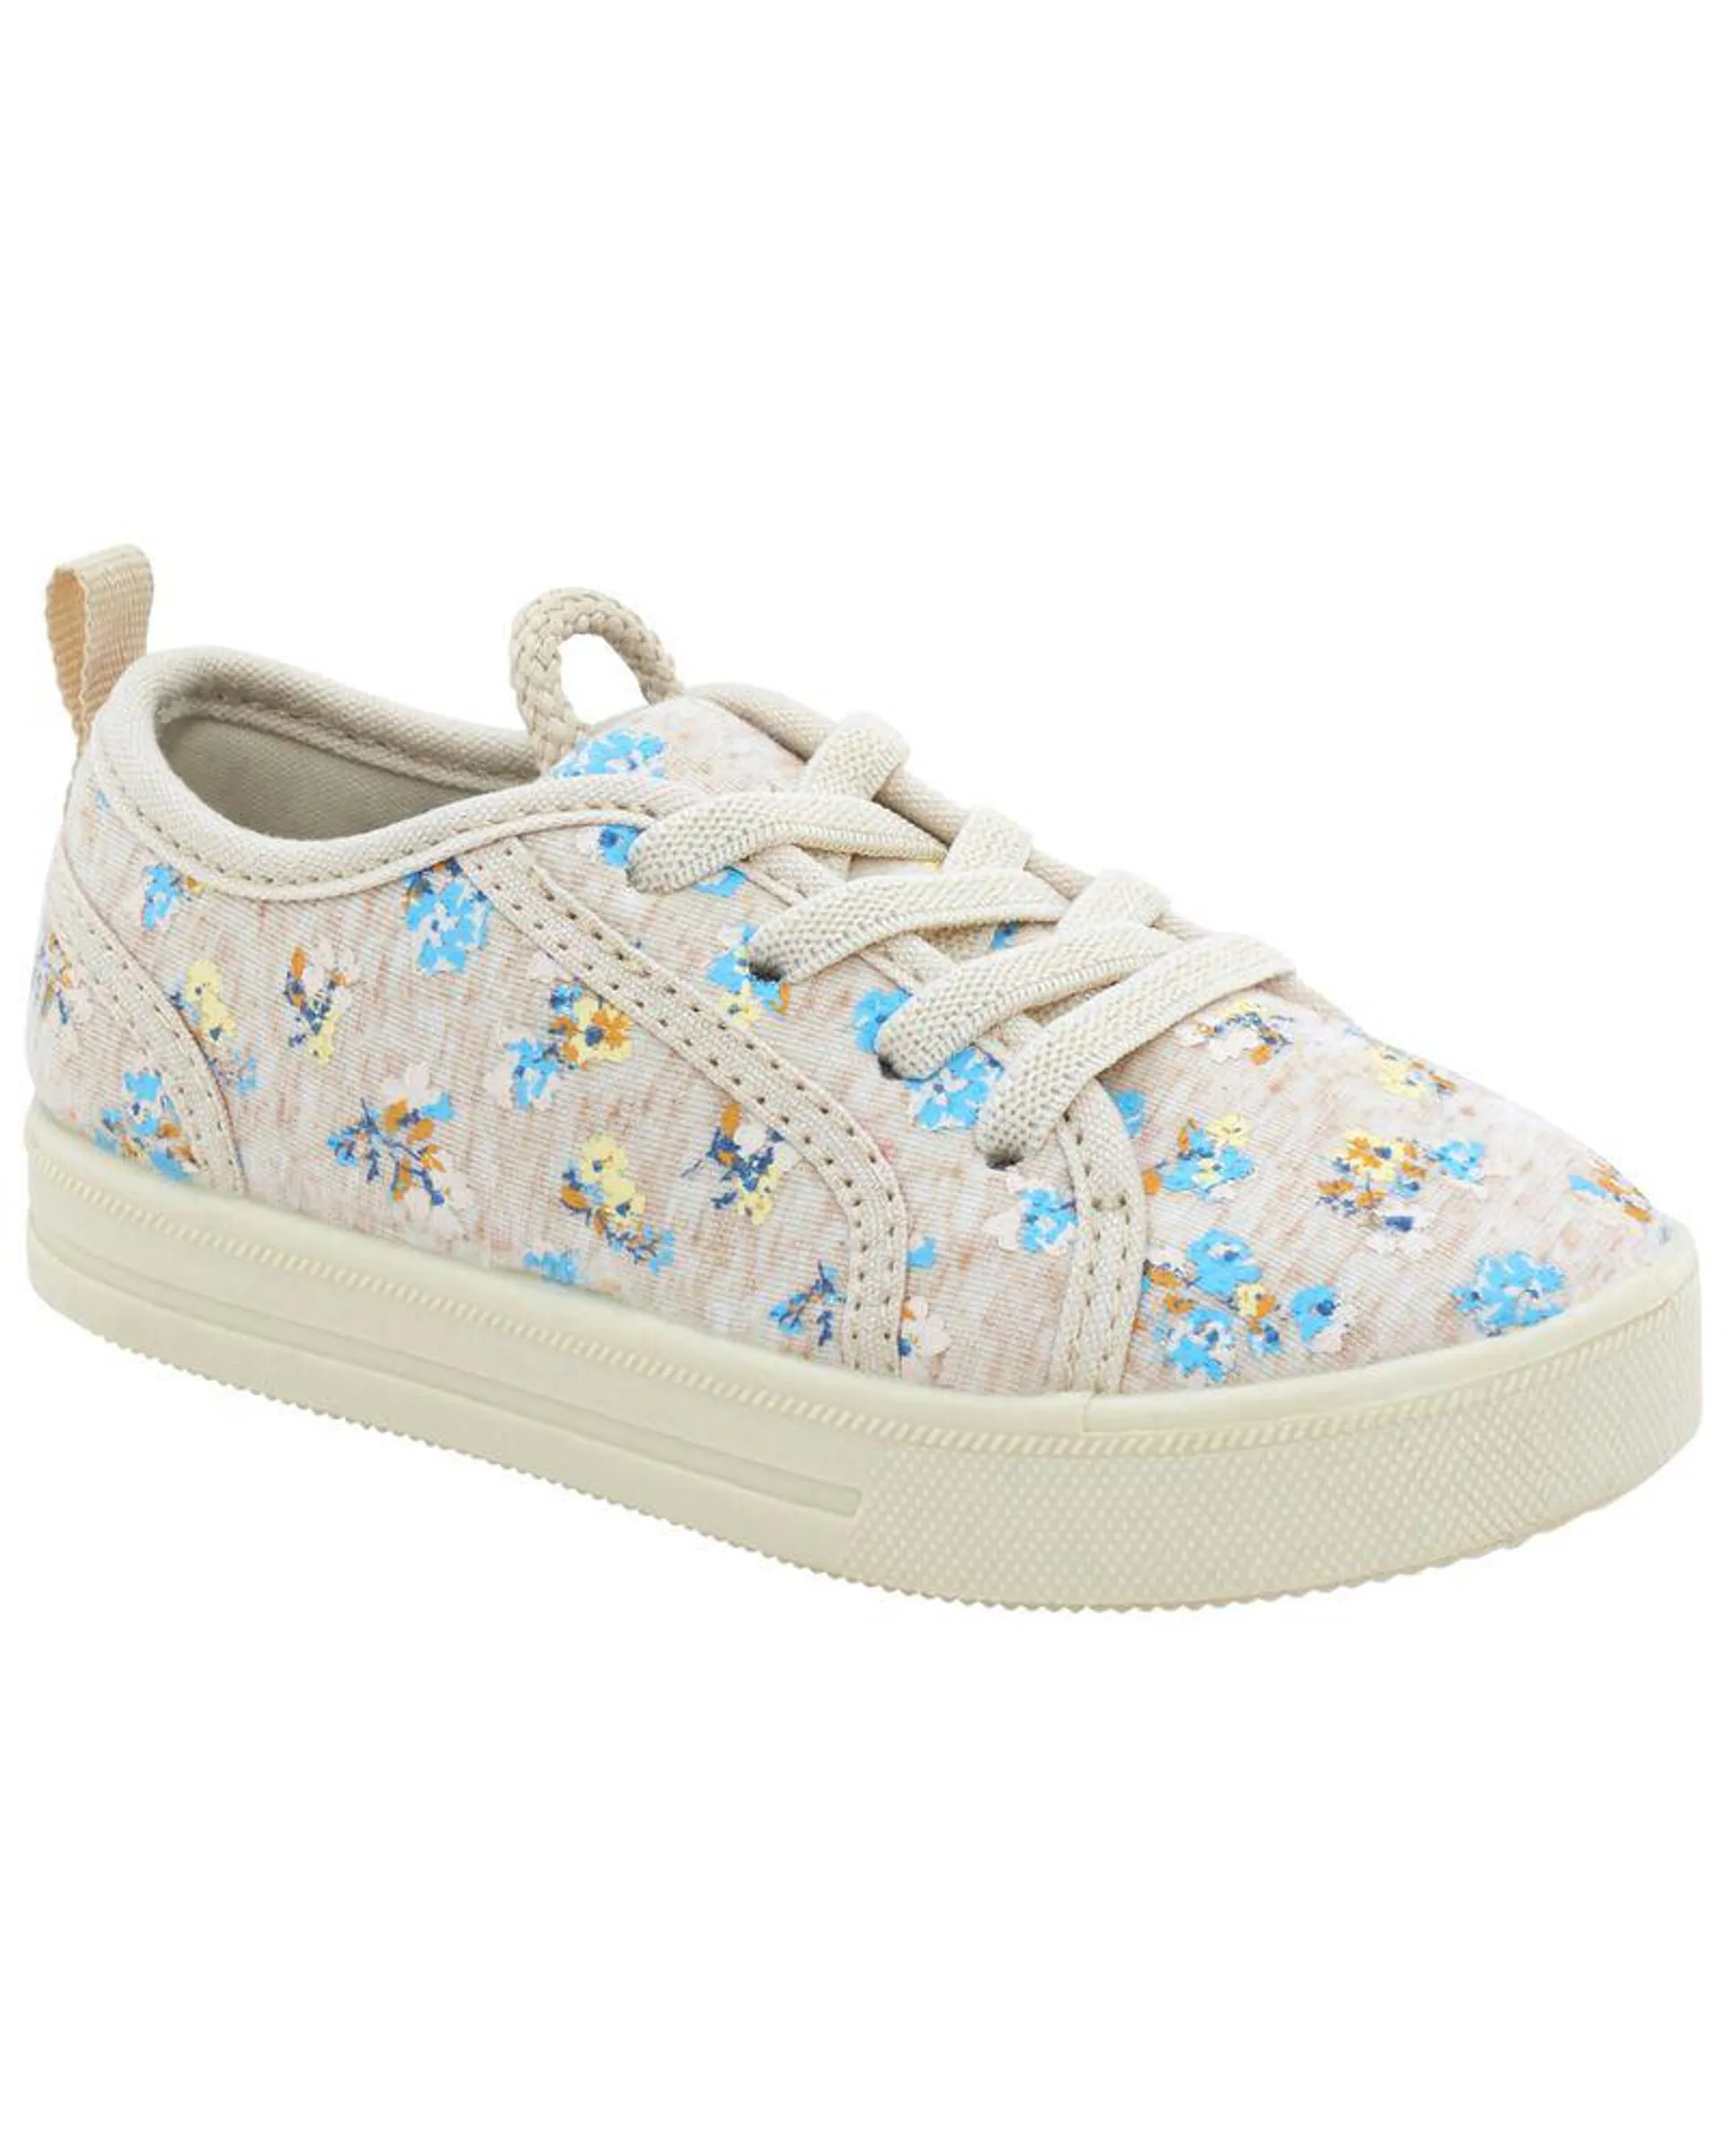 Toddler Pull-On Floral Canvas Sneakers